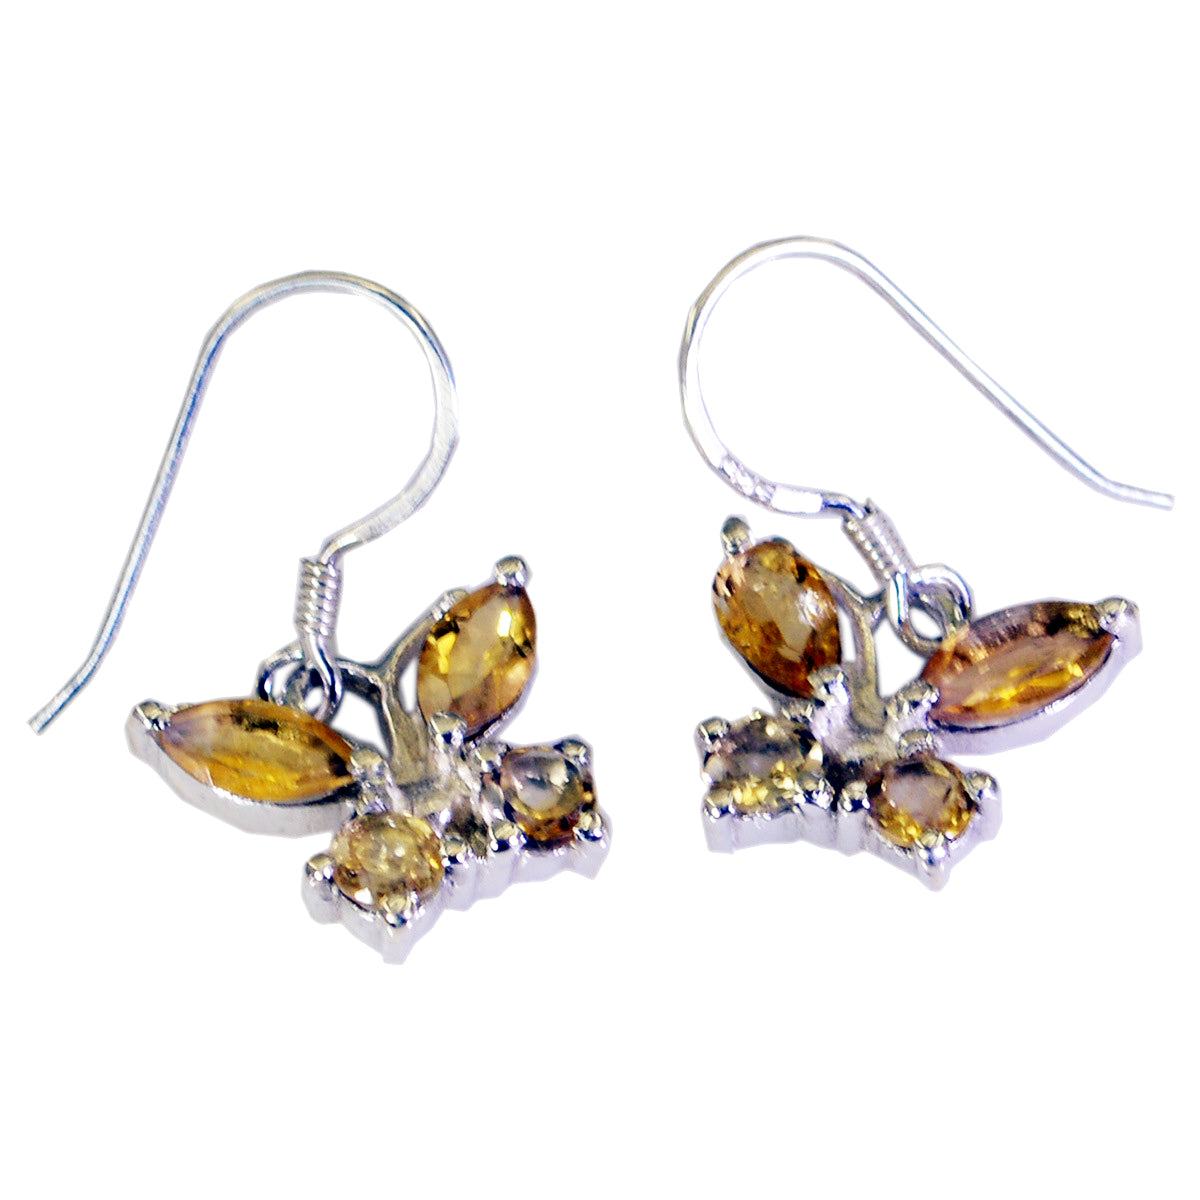 Riyo Good Gemstones multi shape Faceted Yellow Citrine Silver Earrings independence day gift